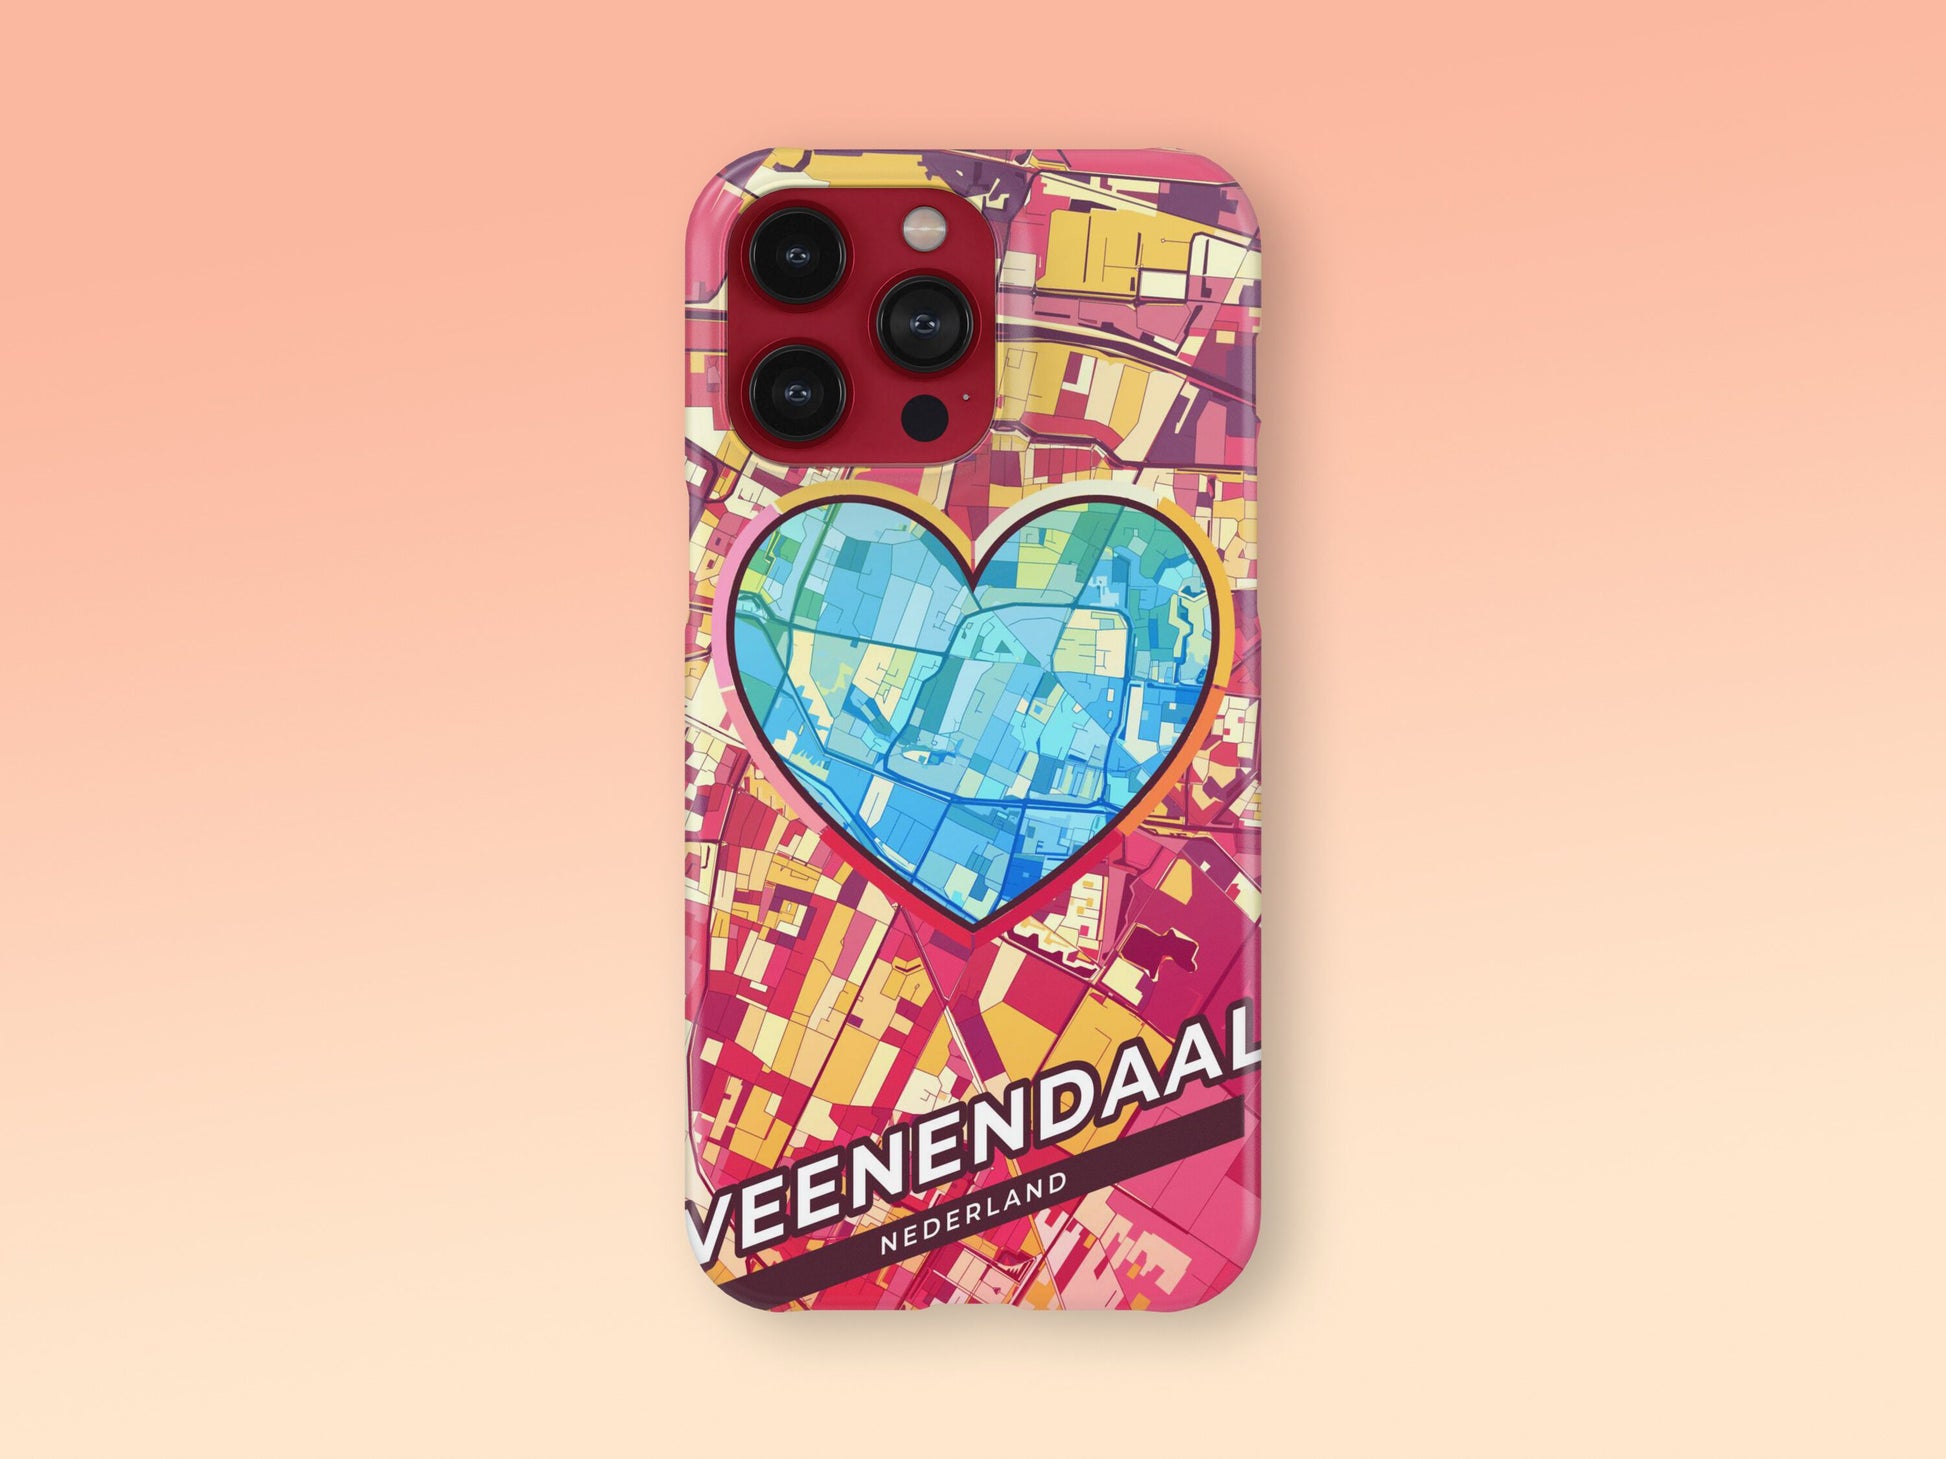 Veenendaal Netherlands slim phone case with colorful icon 2